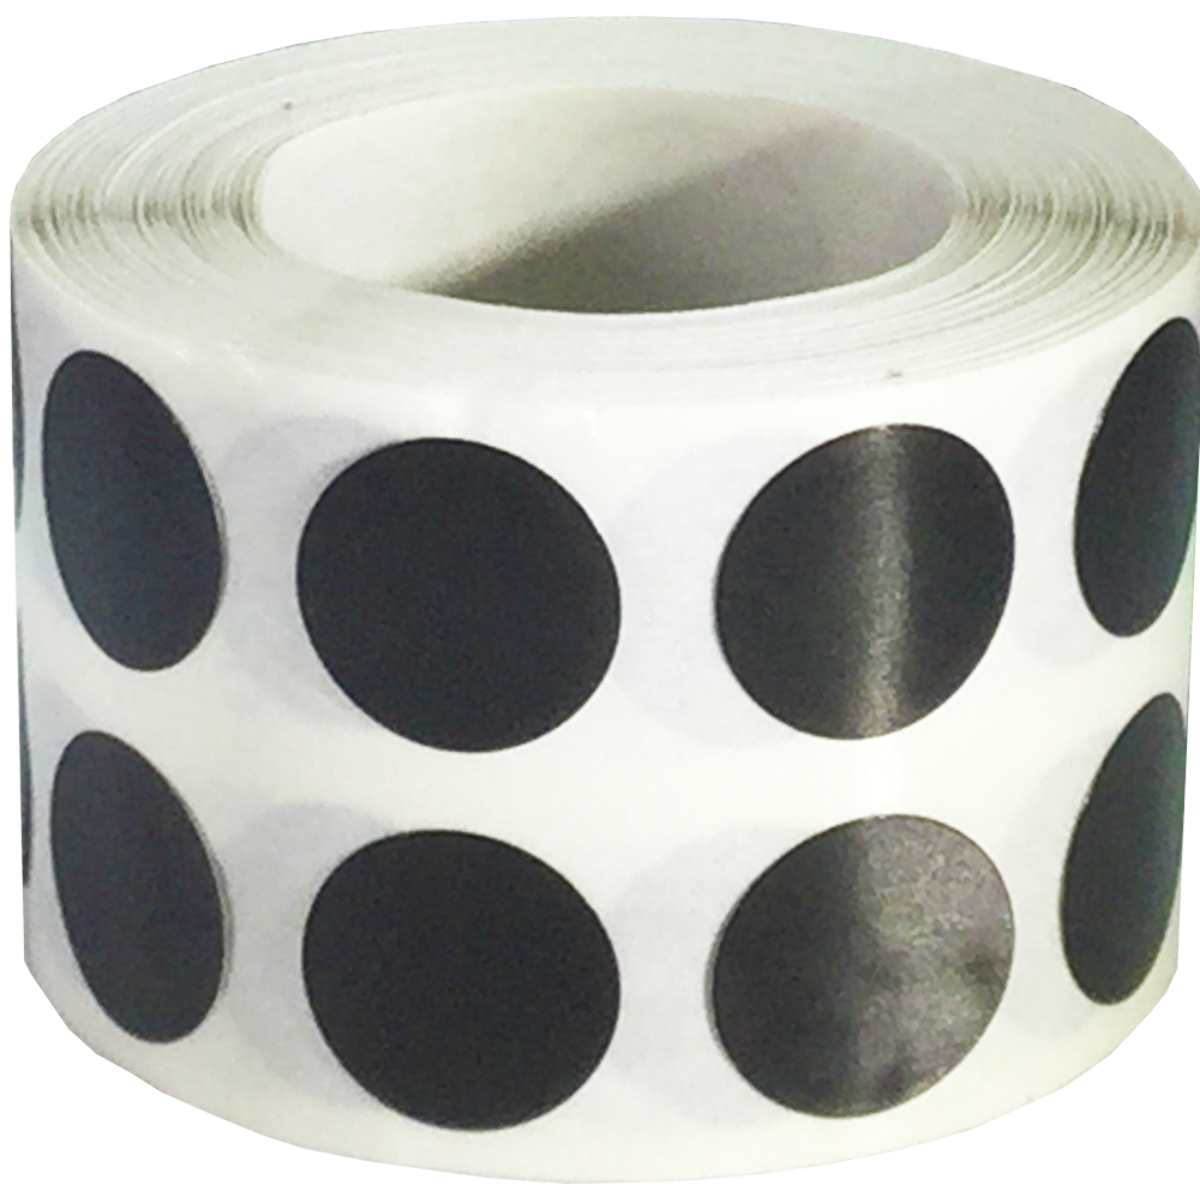 Small 1/2 Round Removable Black Dot Stickers